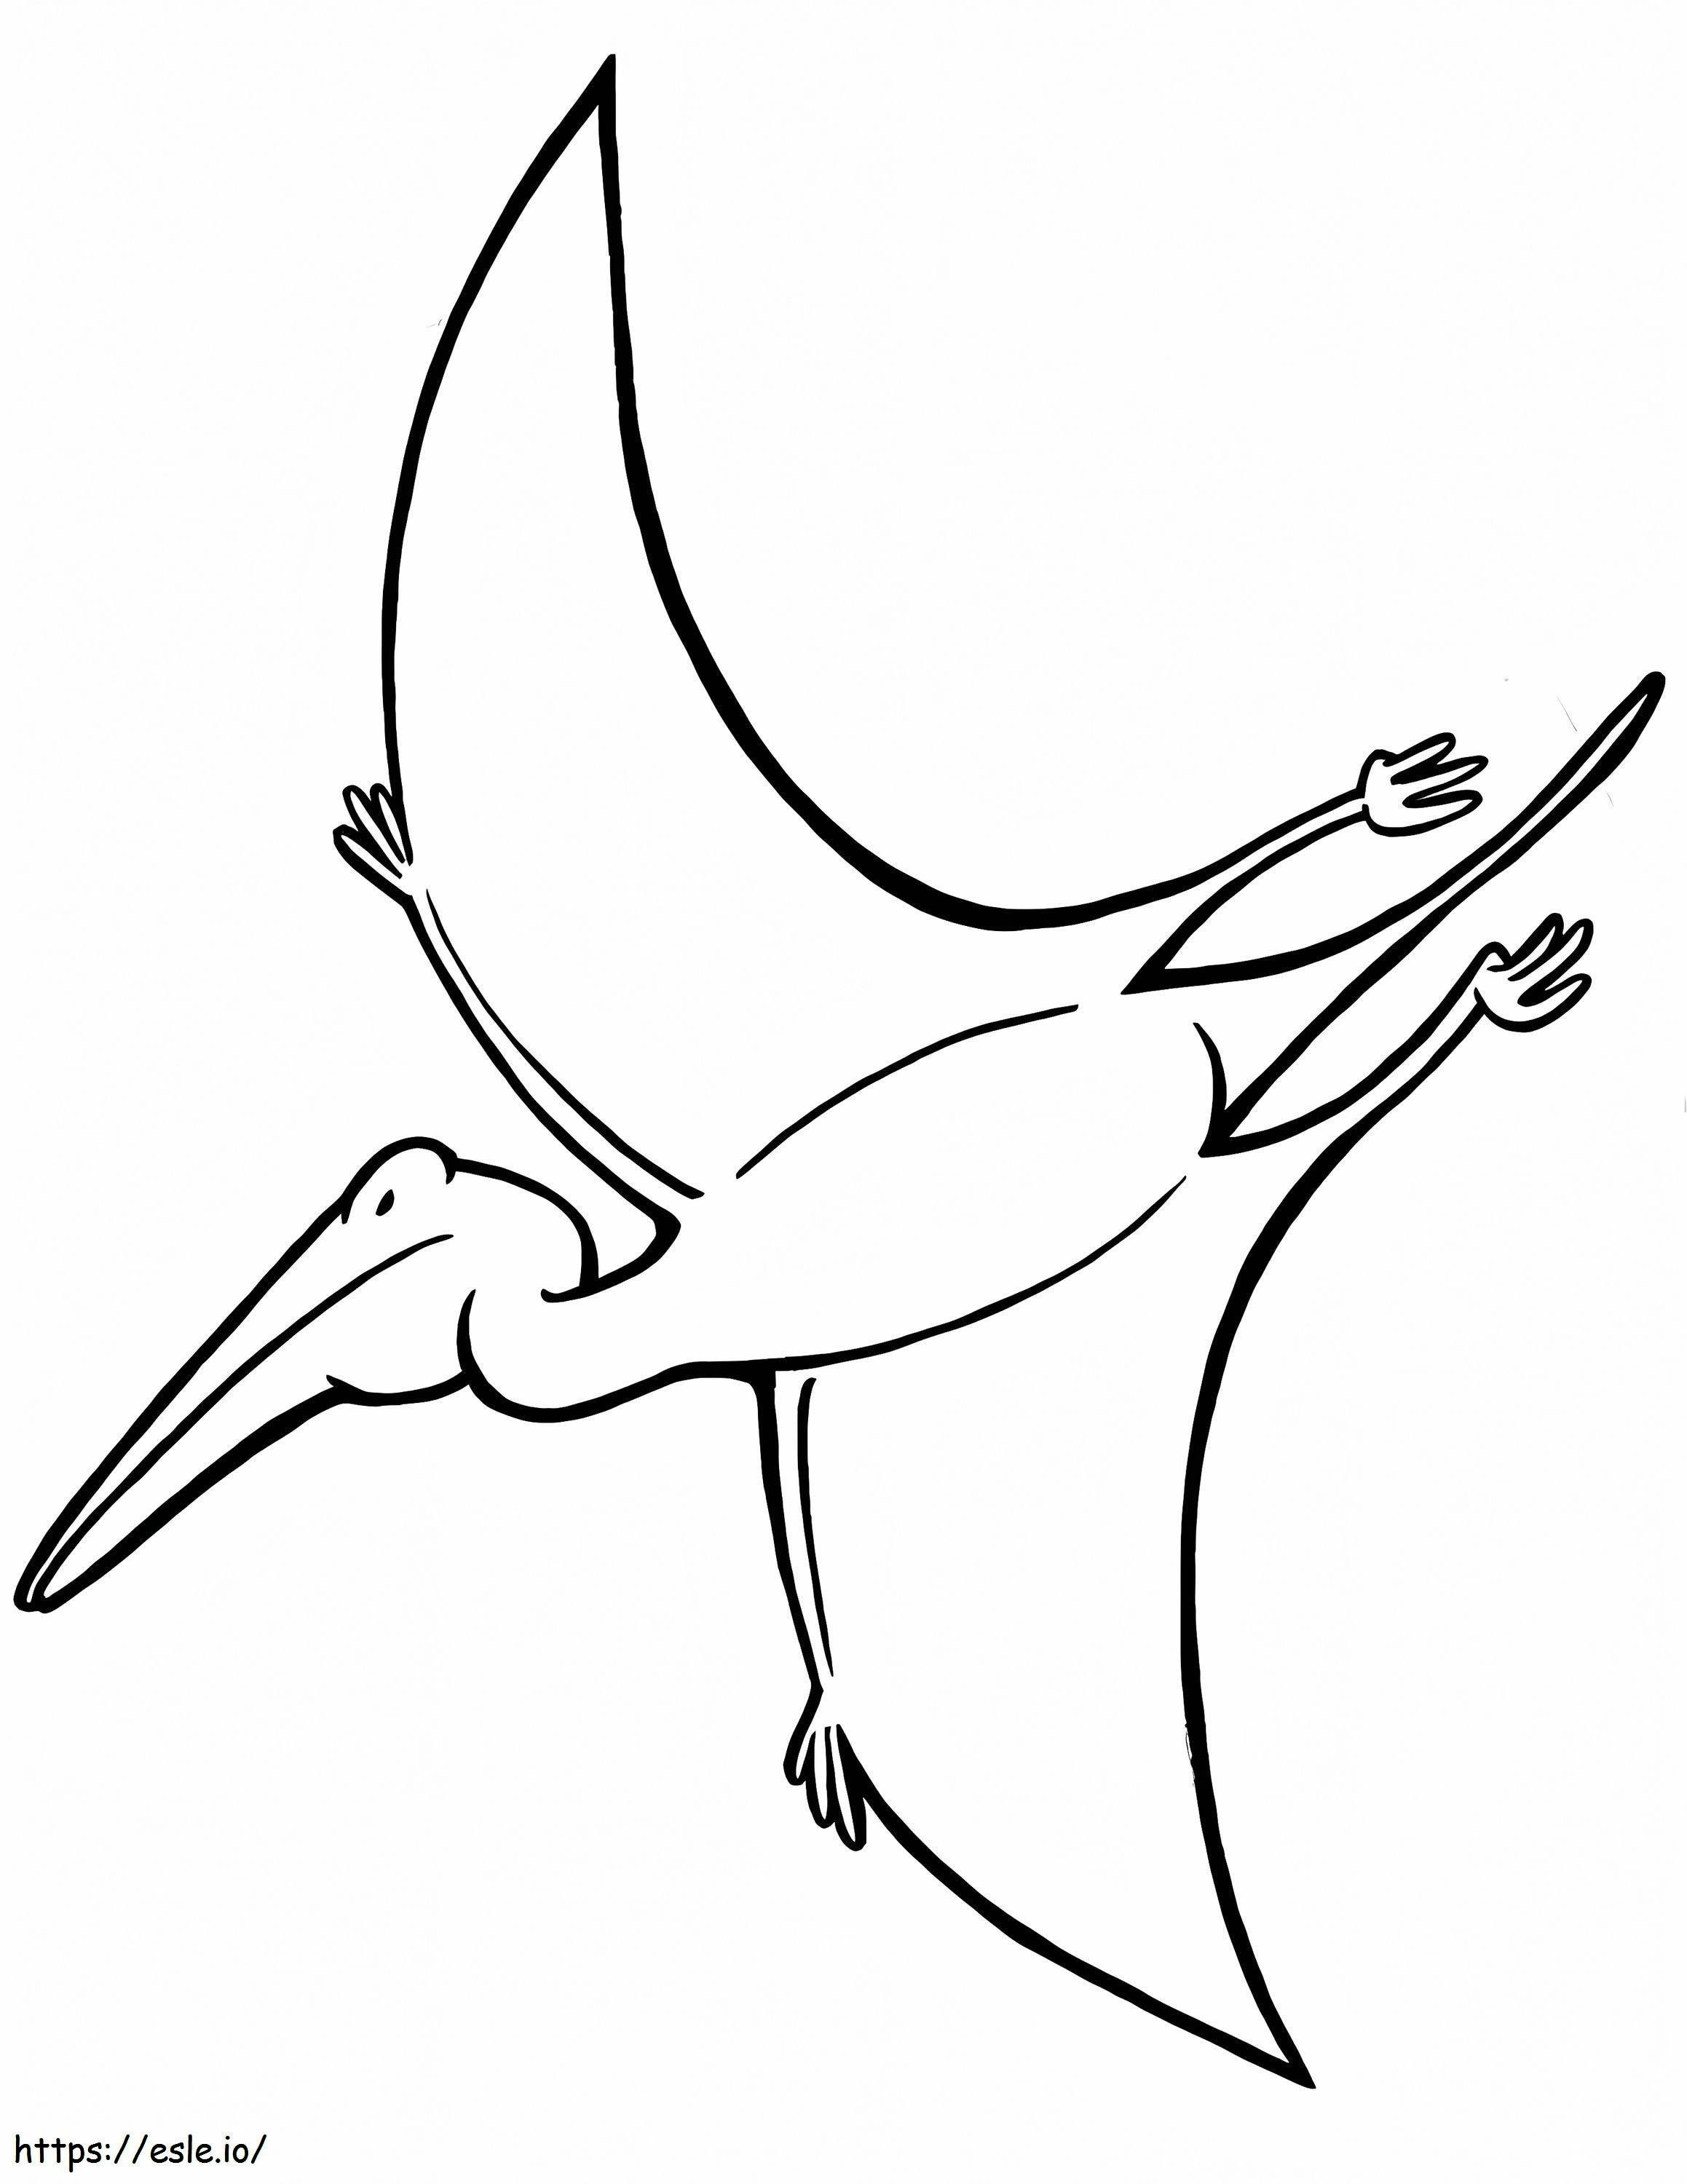 Pterodactyl 1 coloring page